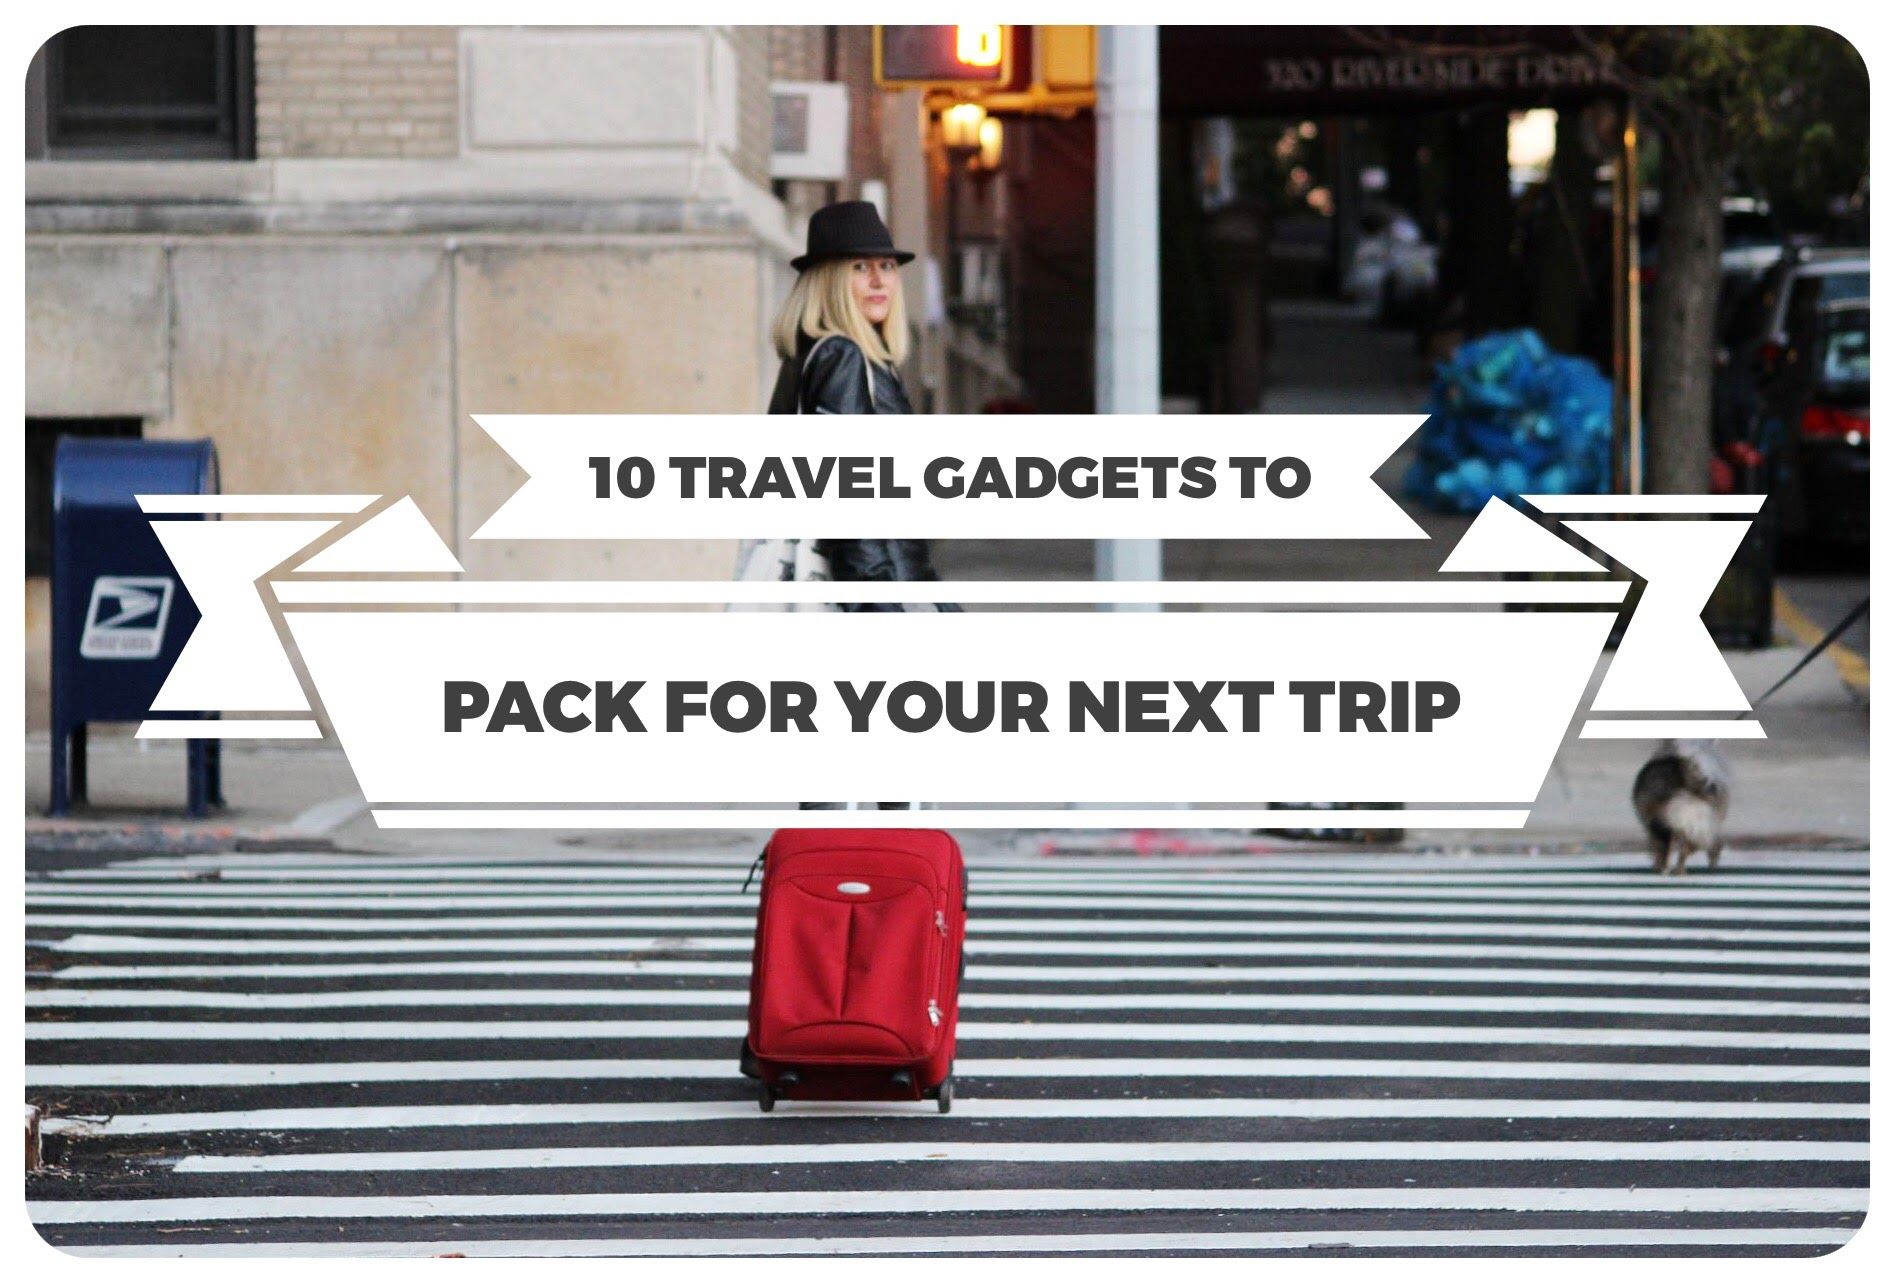 10 Travel Gadgets And Accessories You’ll Want To Pack For Your Next Trip (2017 Edition)